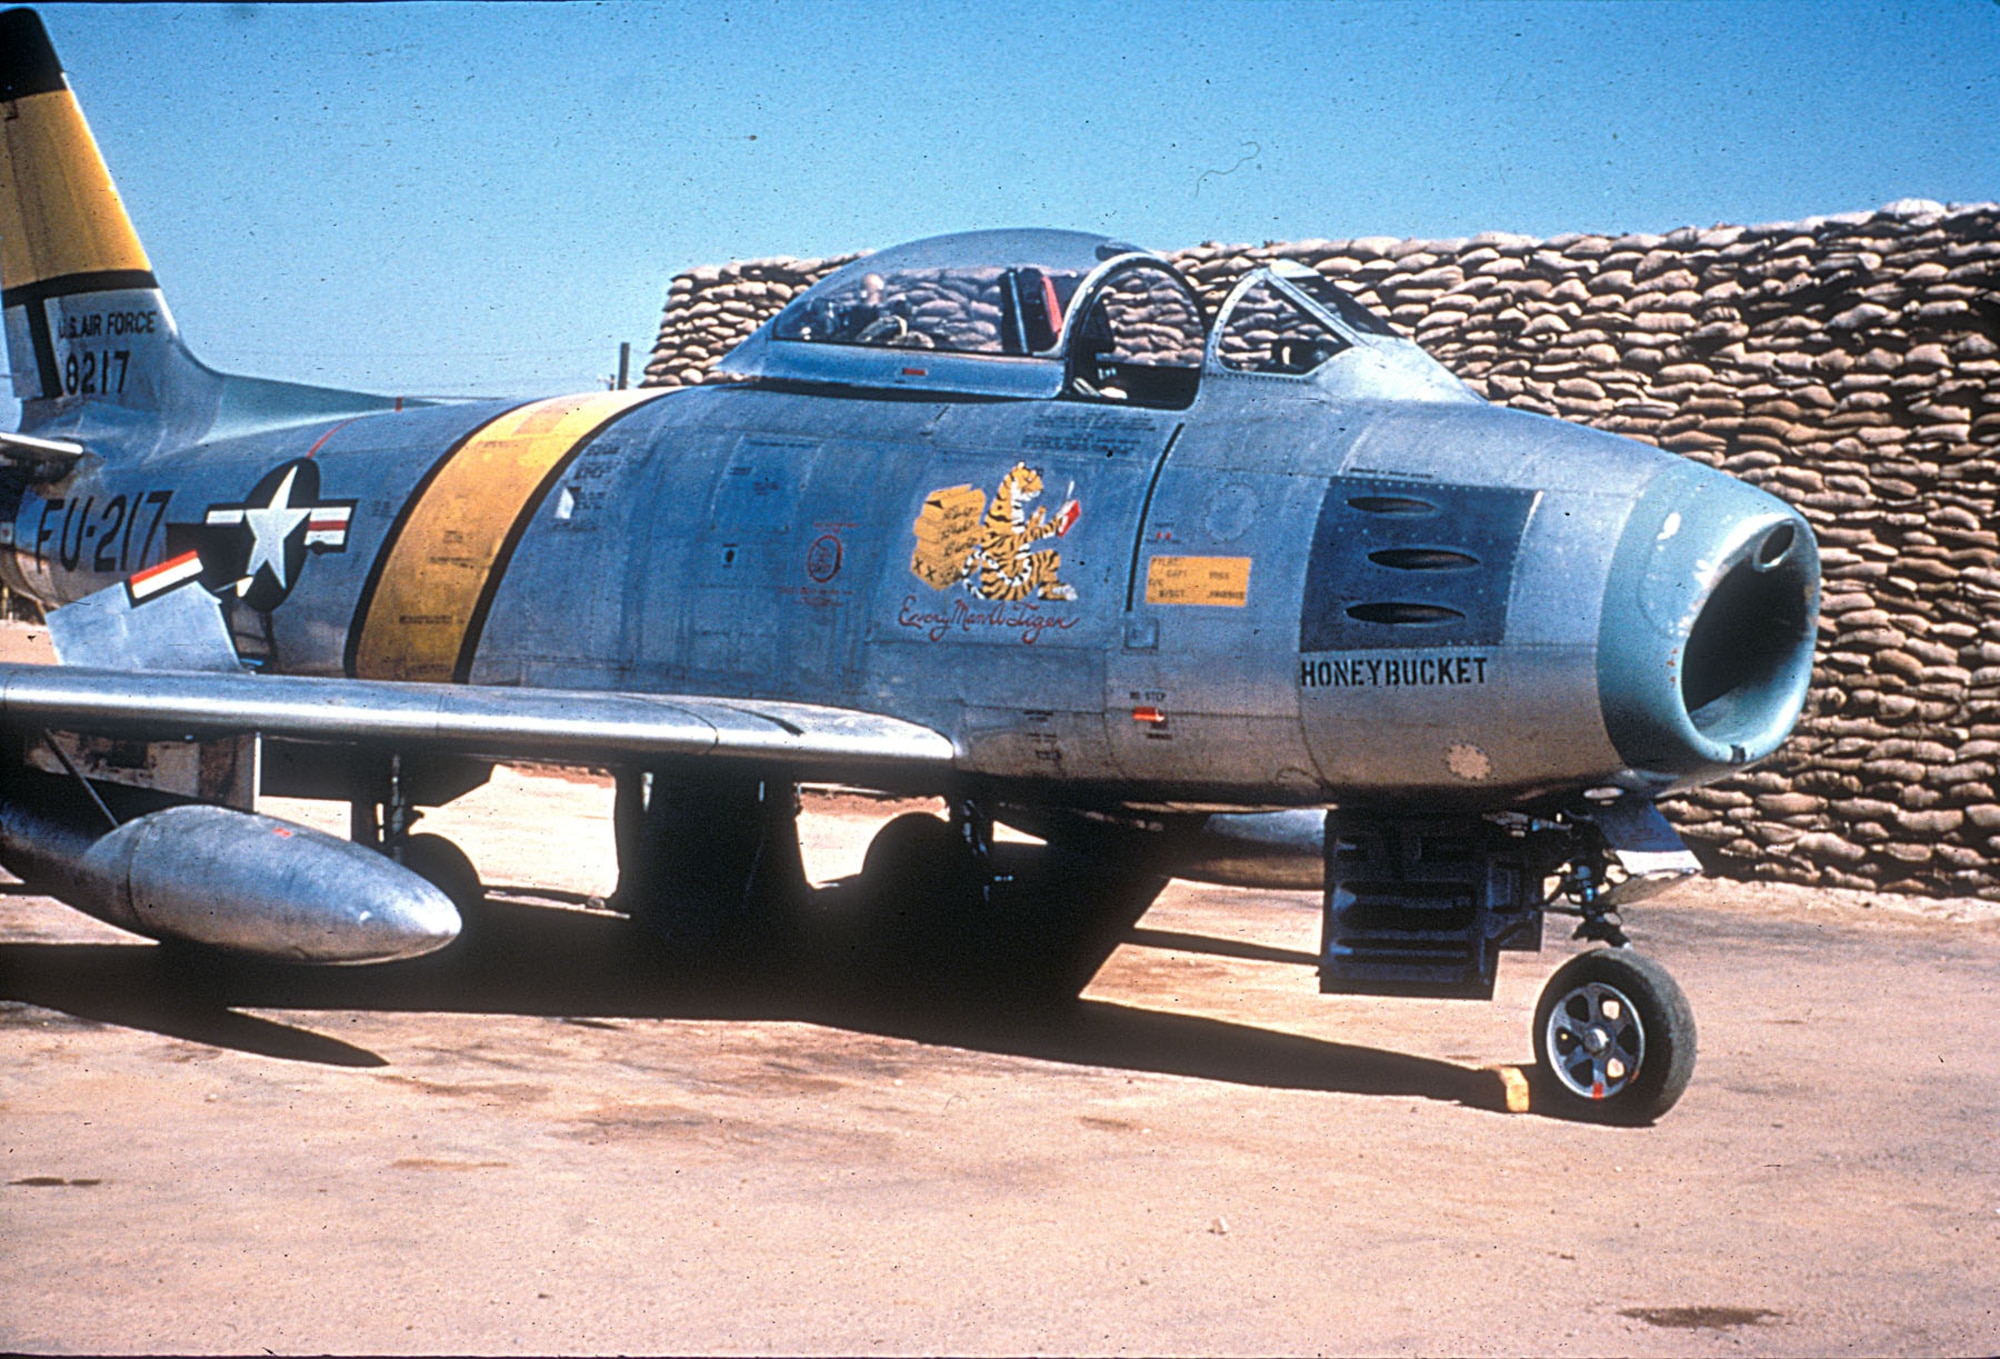 A few F-86 fighters were modified into RF-86 reconnaissance aircraft for dangerous unescorted missions over MiG Alley. Shown here in 1952, RF-86A "Honeybucket" was lost on a later mission. (U.S. Air Force photo)